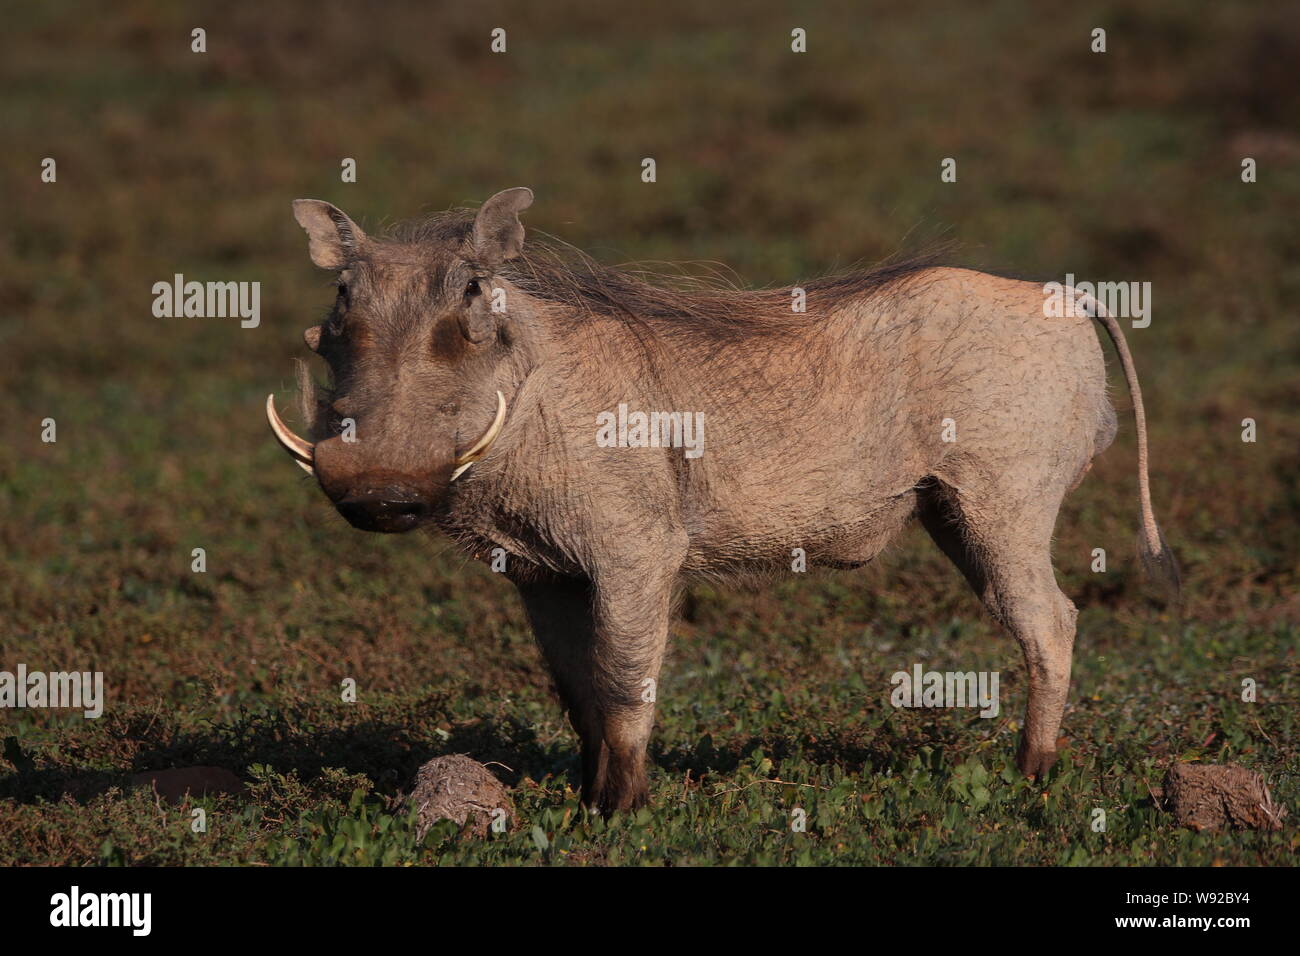 A Warthog (Phacochoerus africanus) at the Addo Elephant National Park, Eastern Cape, South Africa. Stock Photo